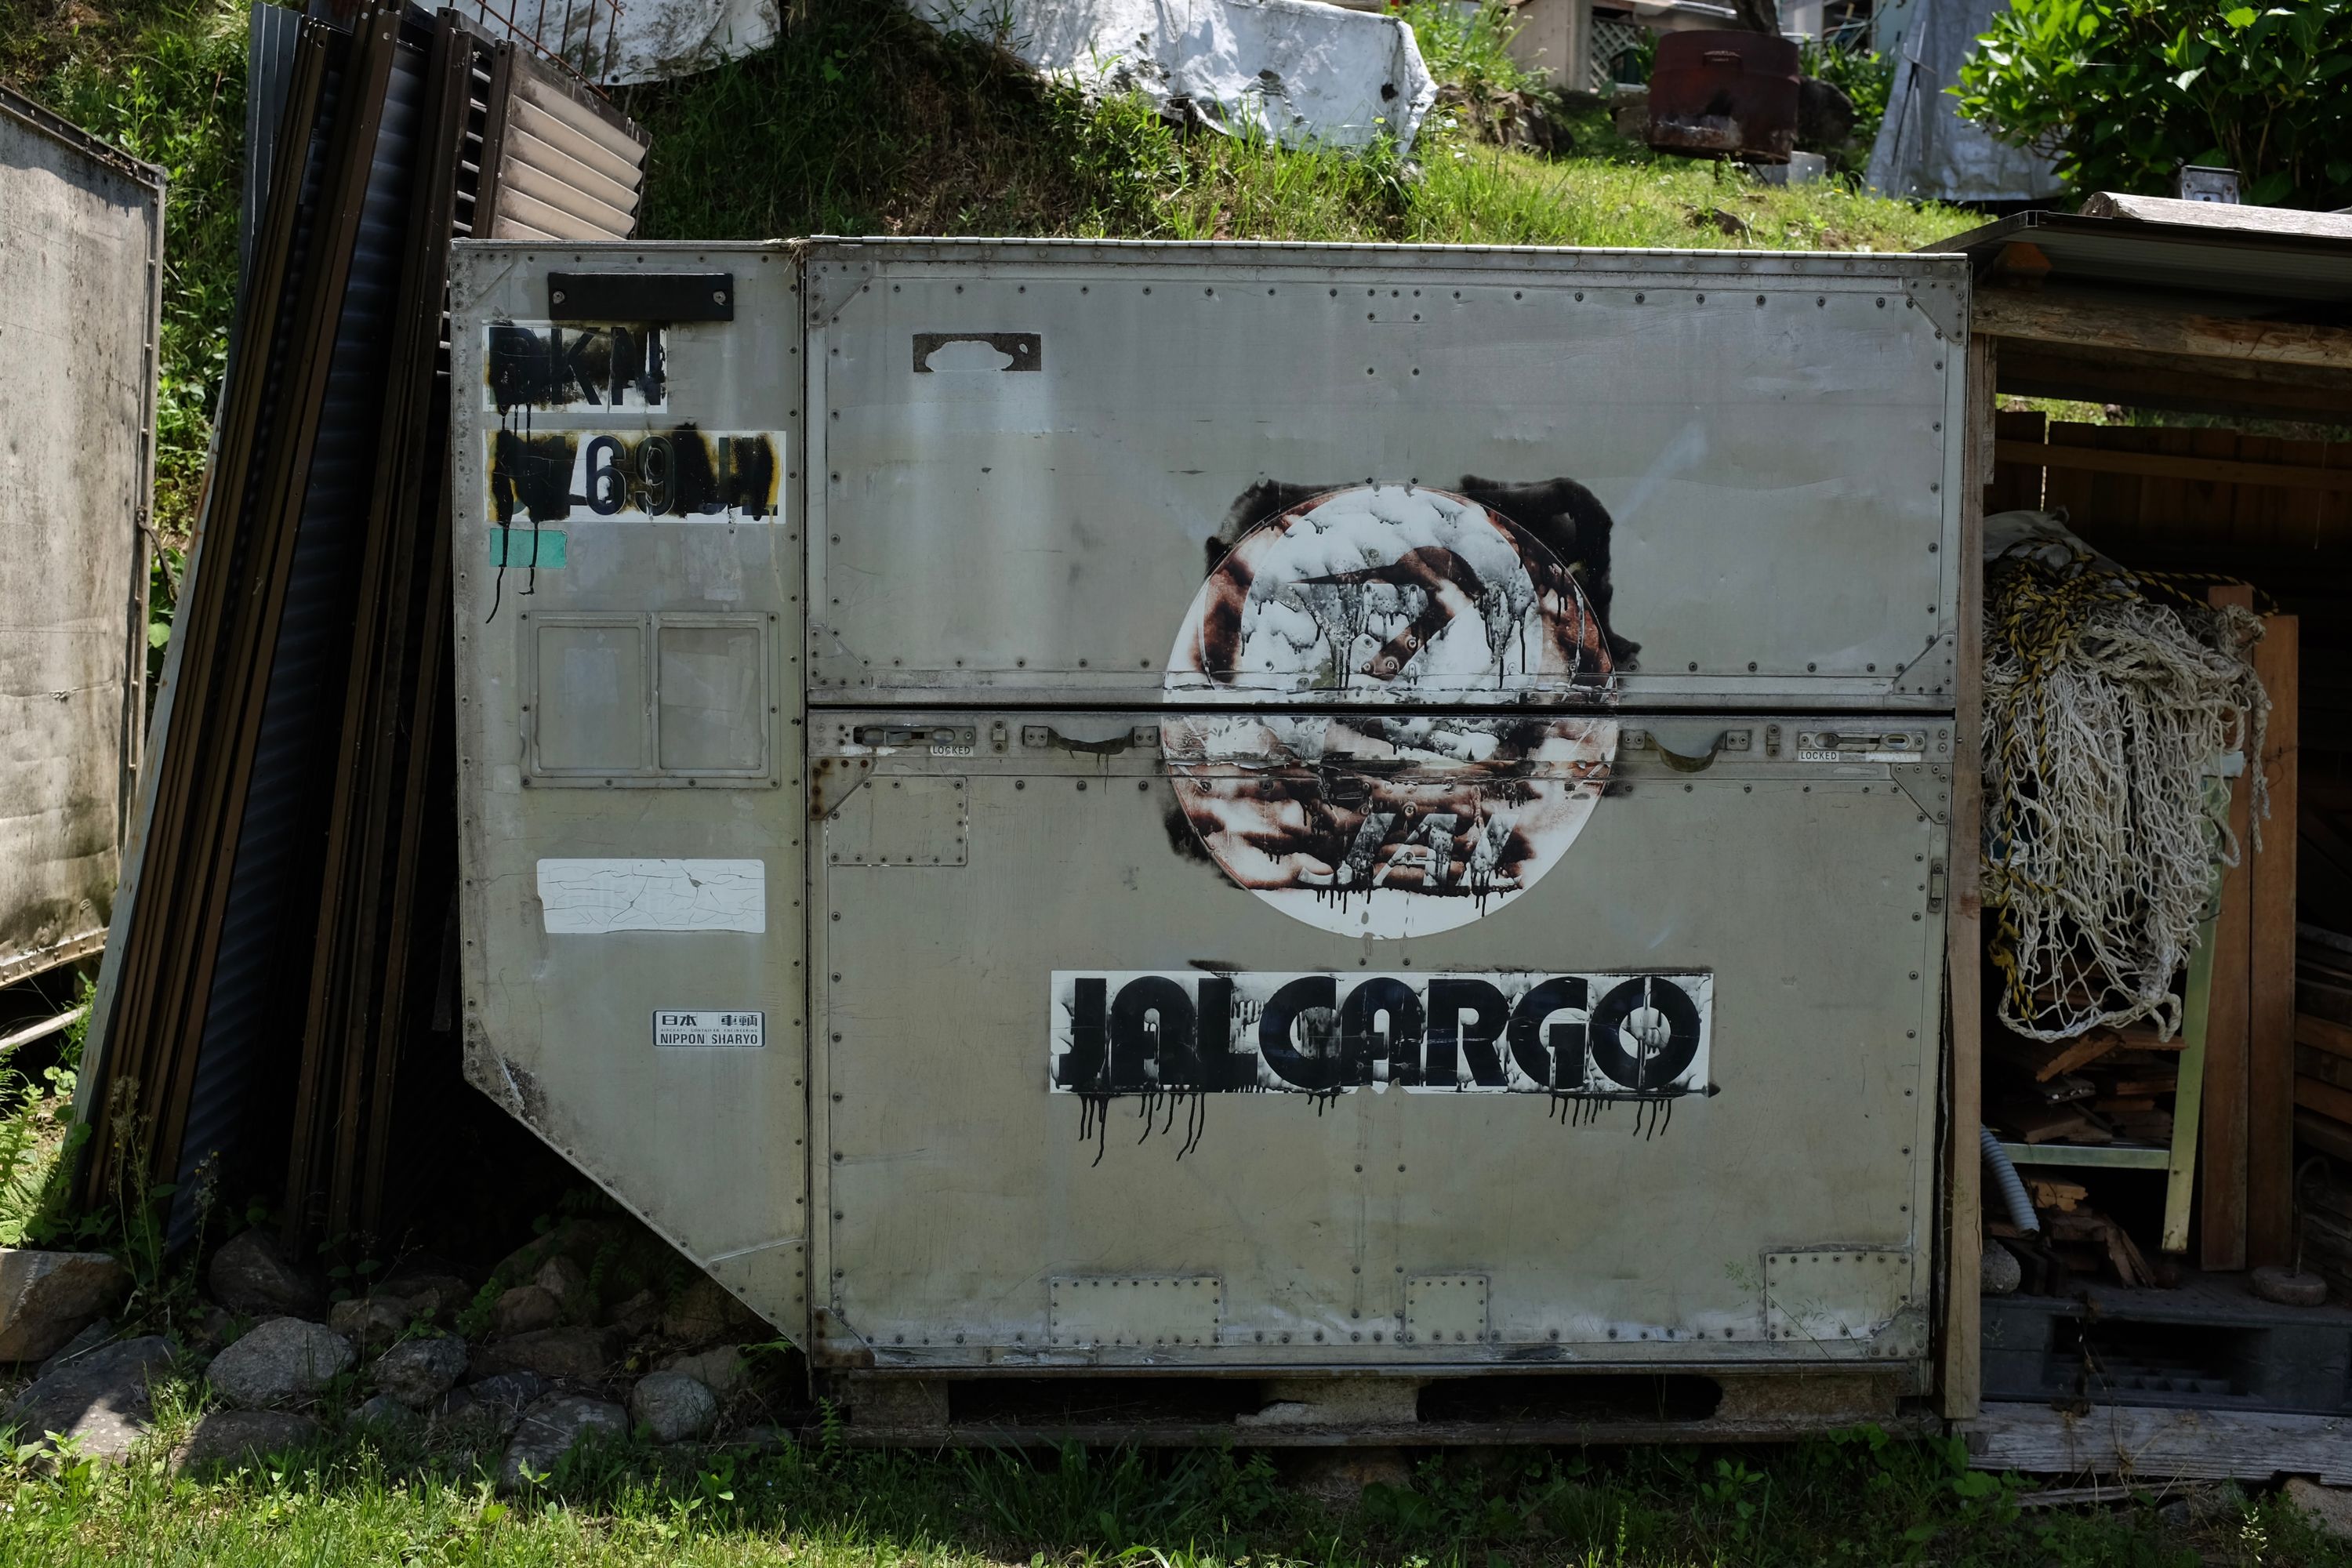 A Japan Airlines cargo container used as a shed in someone’s backyard.